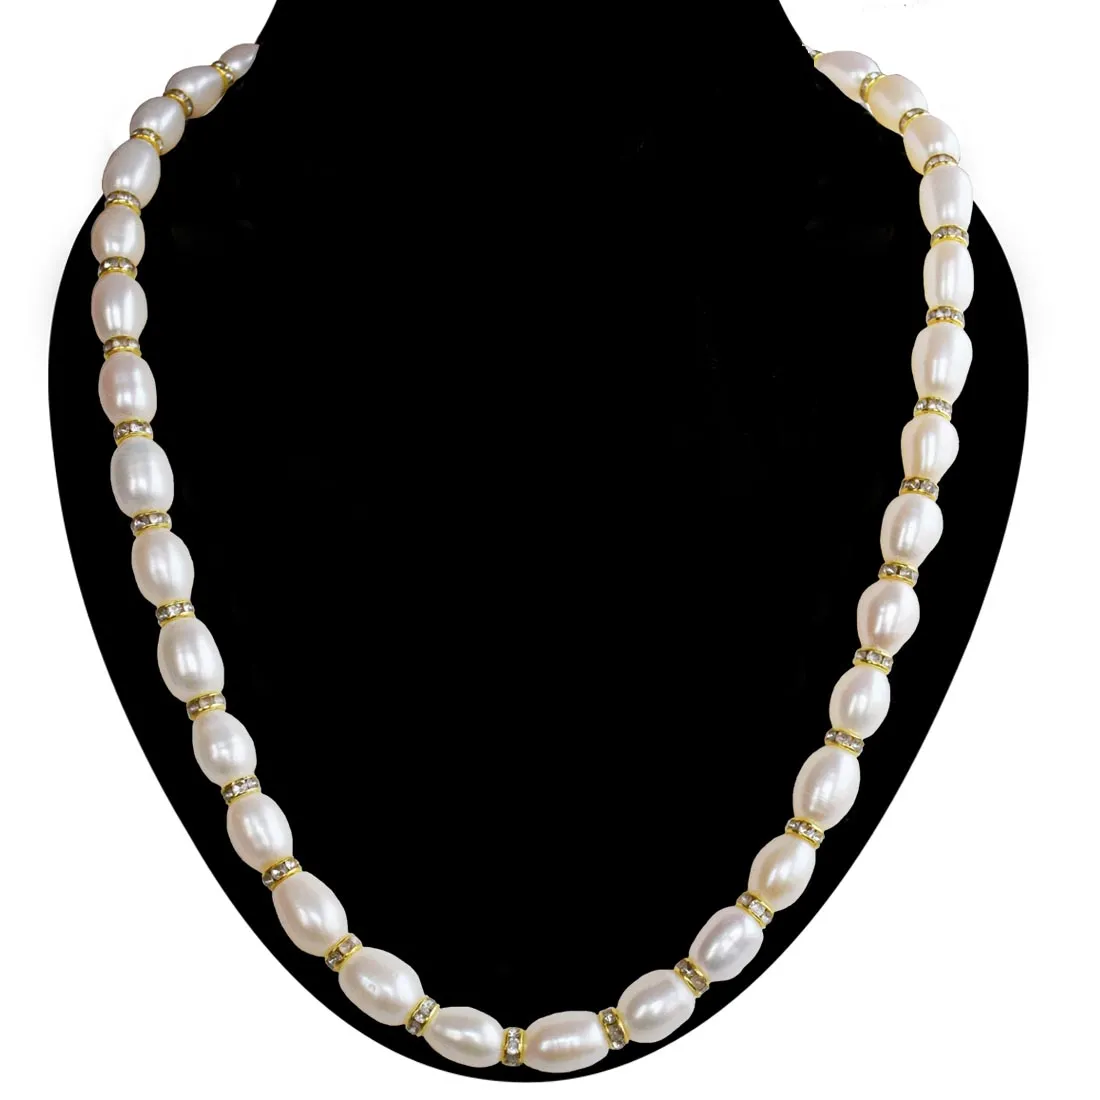 Golden Harmony: Elongated Pearl & Gold-Plated Chakri Necklace (SN1045)